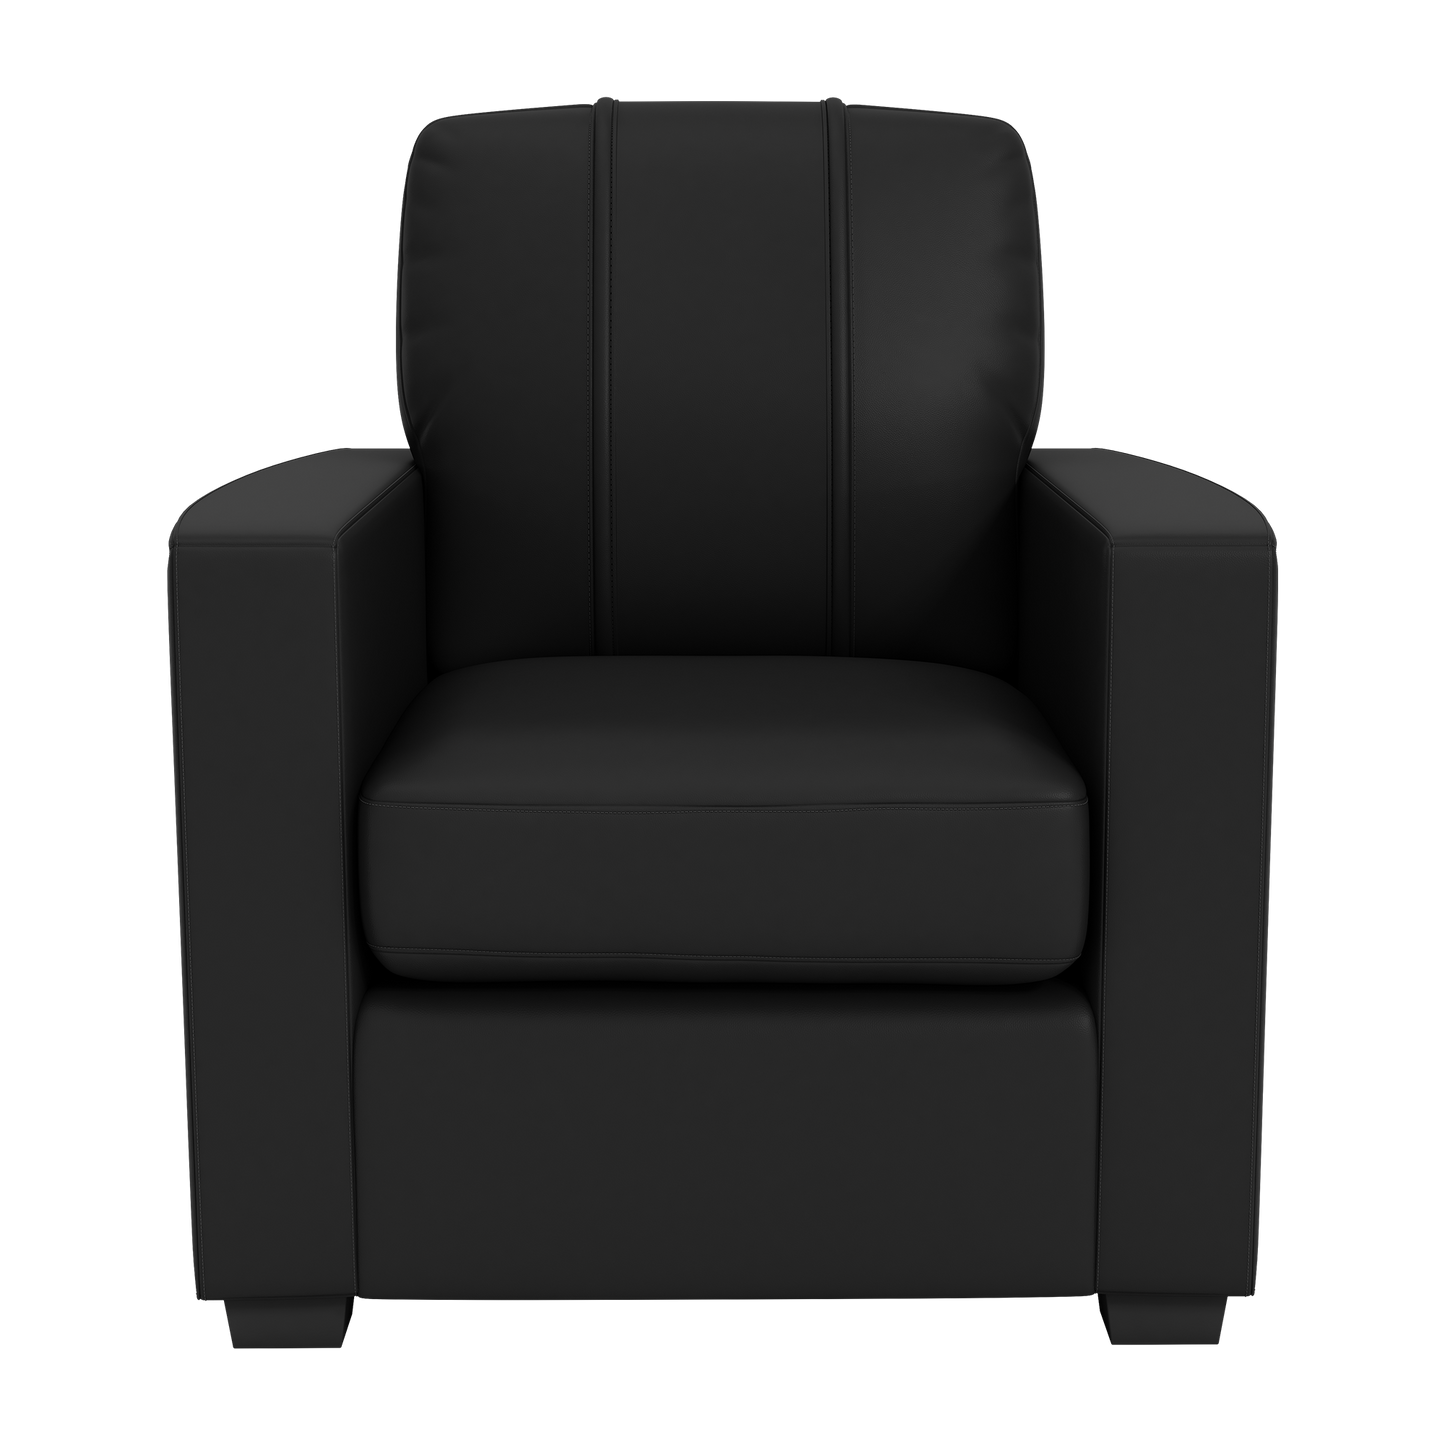 Silver Club Chair with Baltimore Ravens Primary Logo